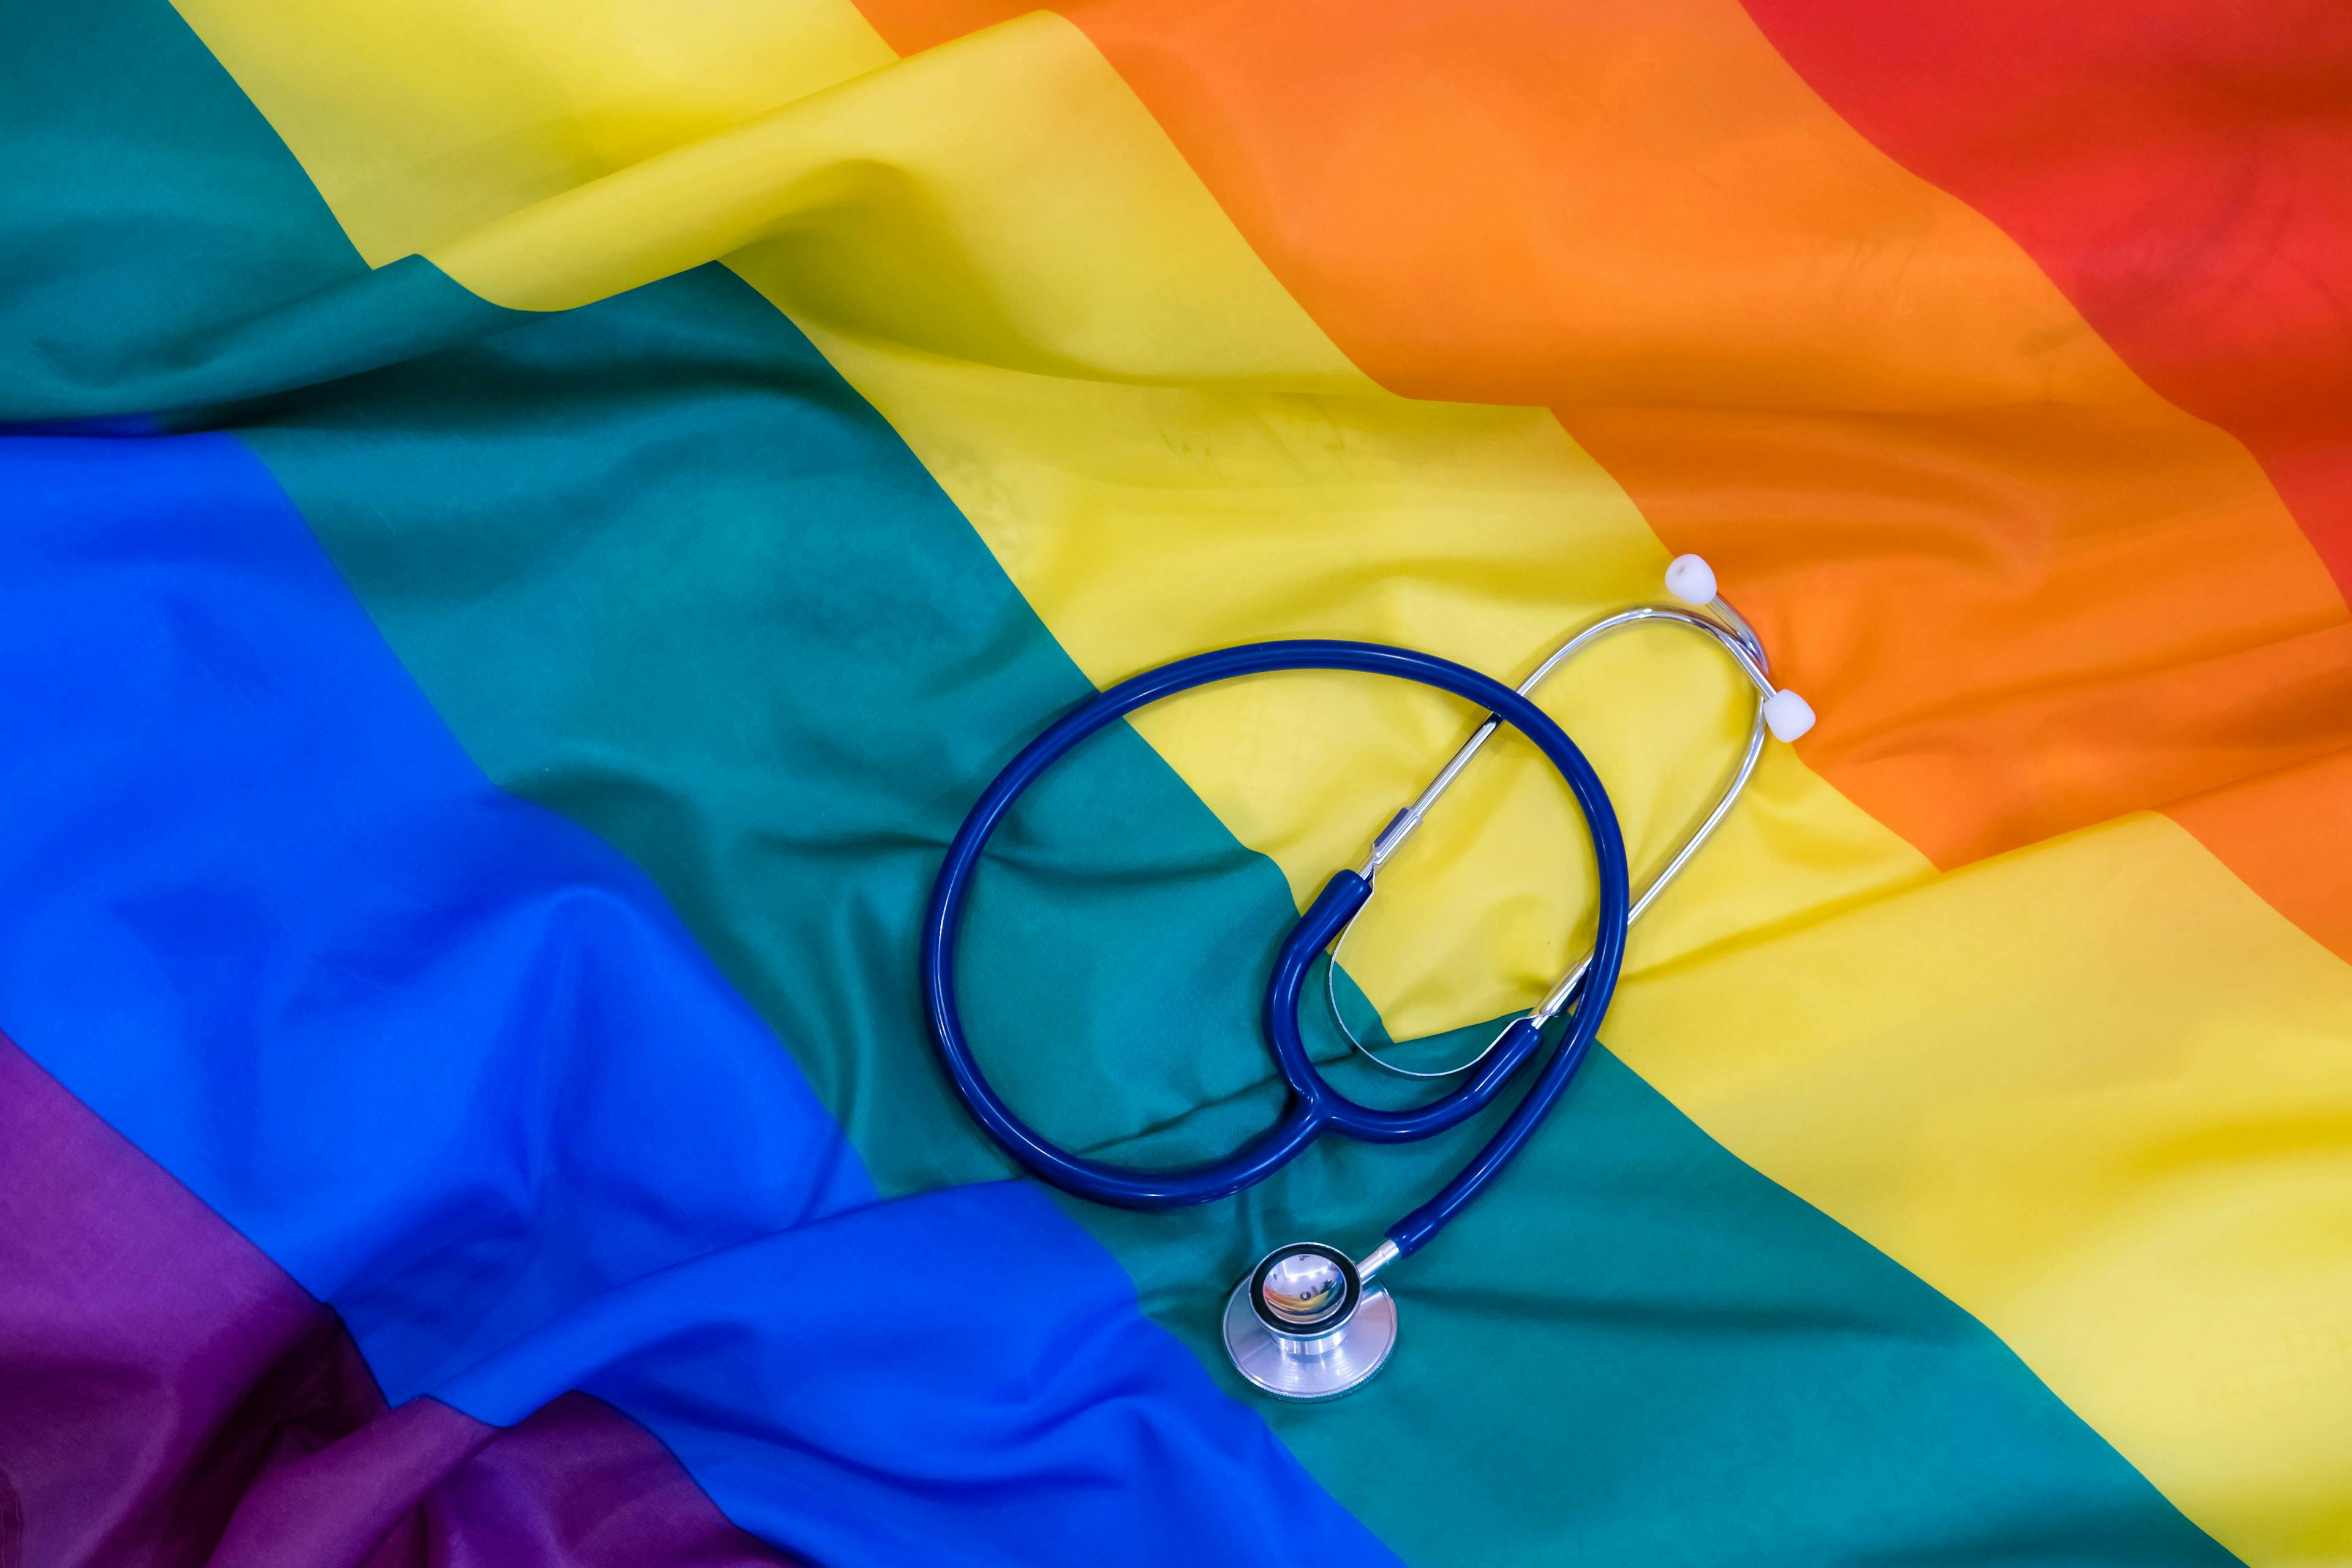 AHA: More Clinical Education Needed on Appropriate Care for LGBTQ Patients